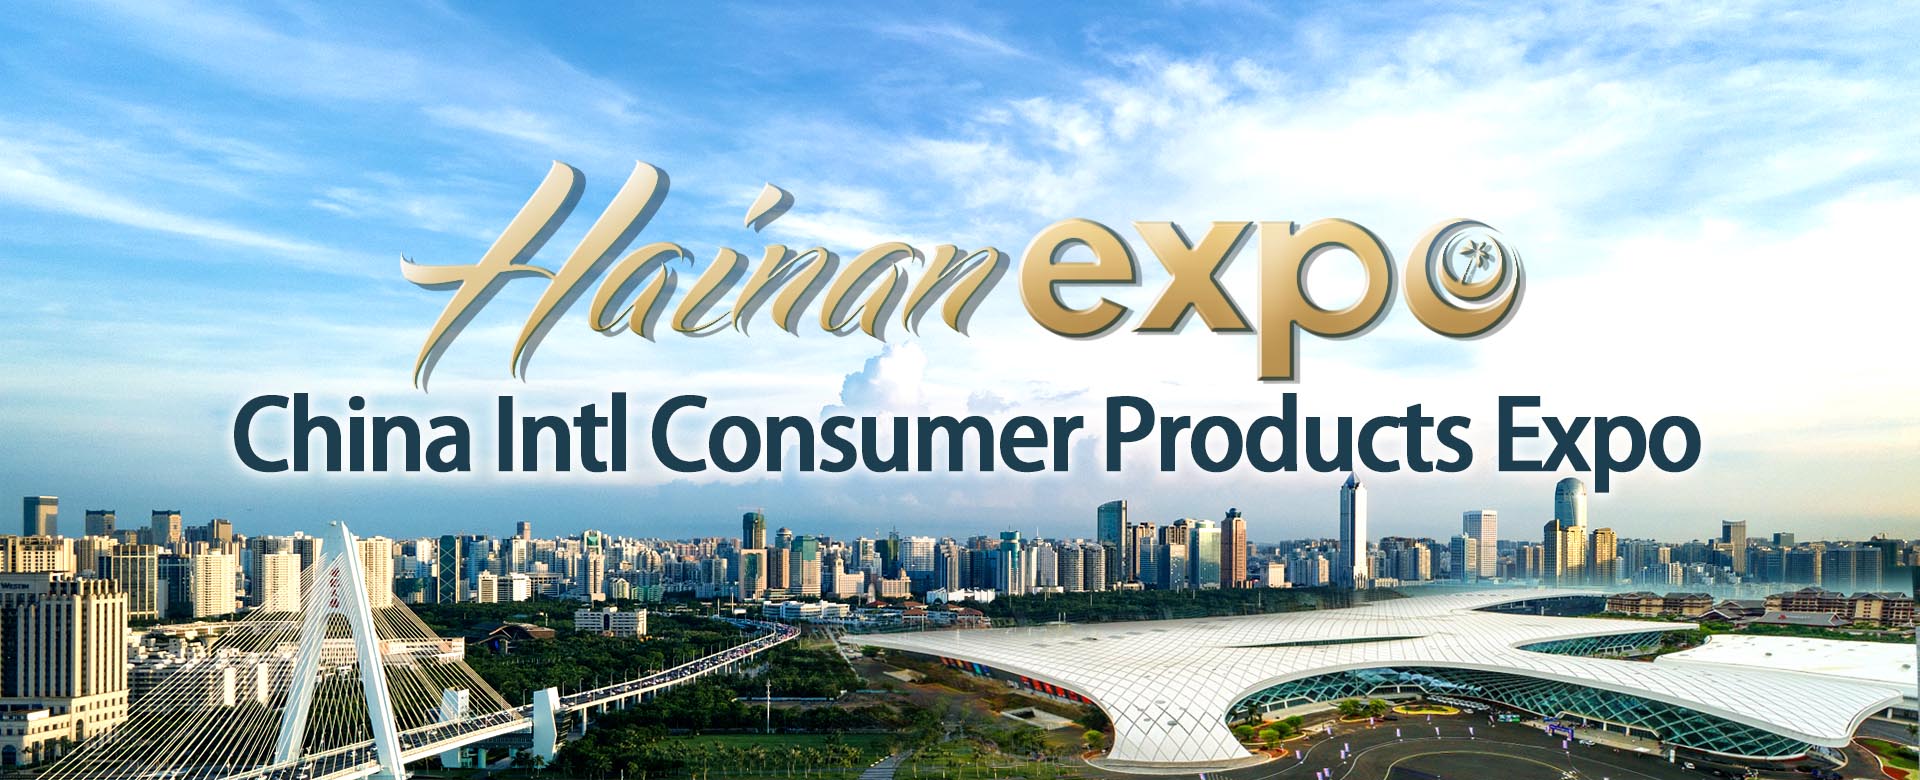 China Intl Consumer Products Expo